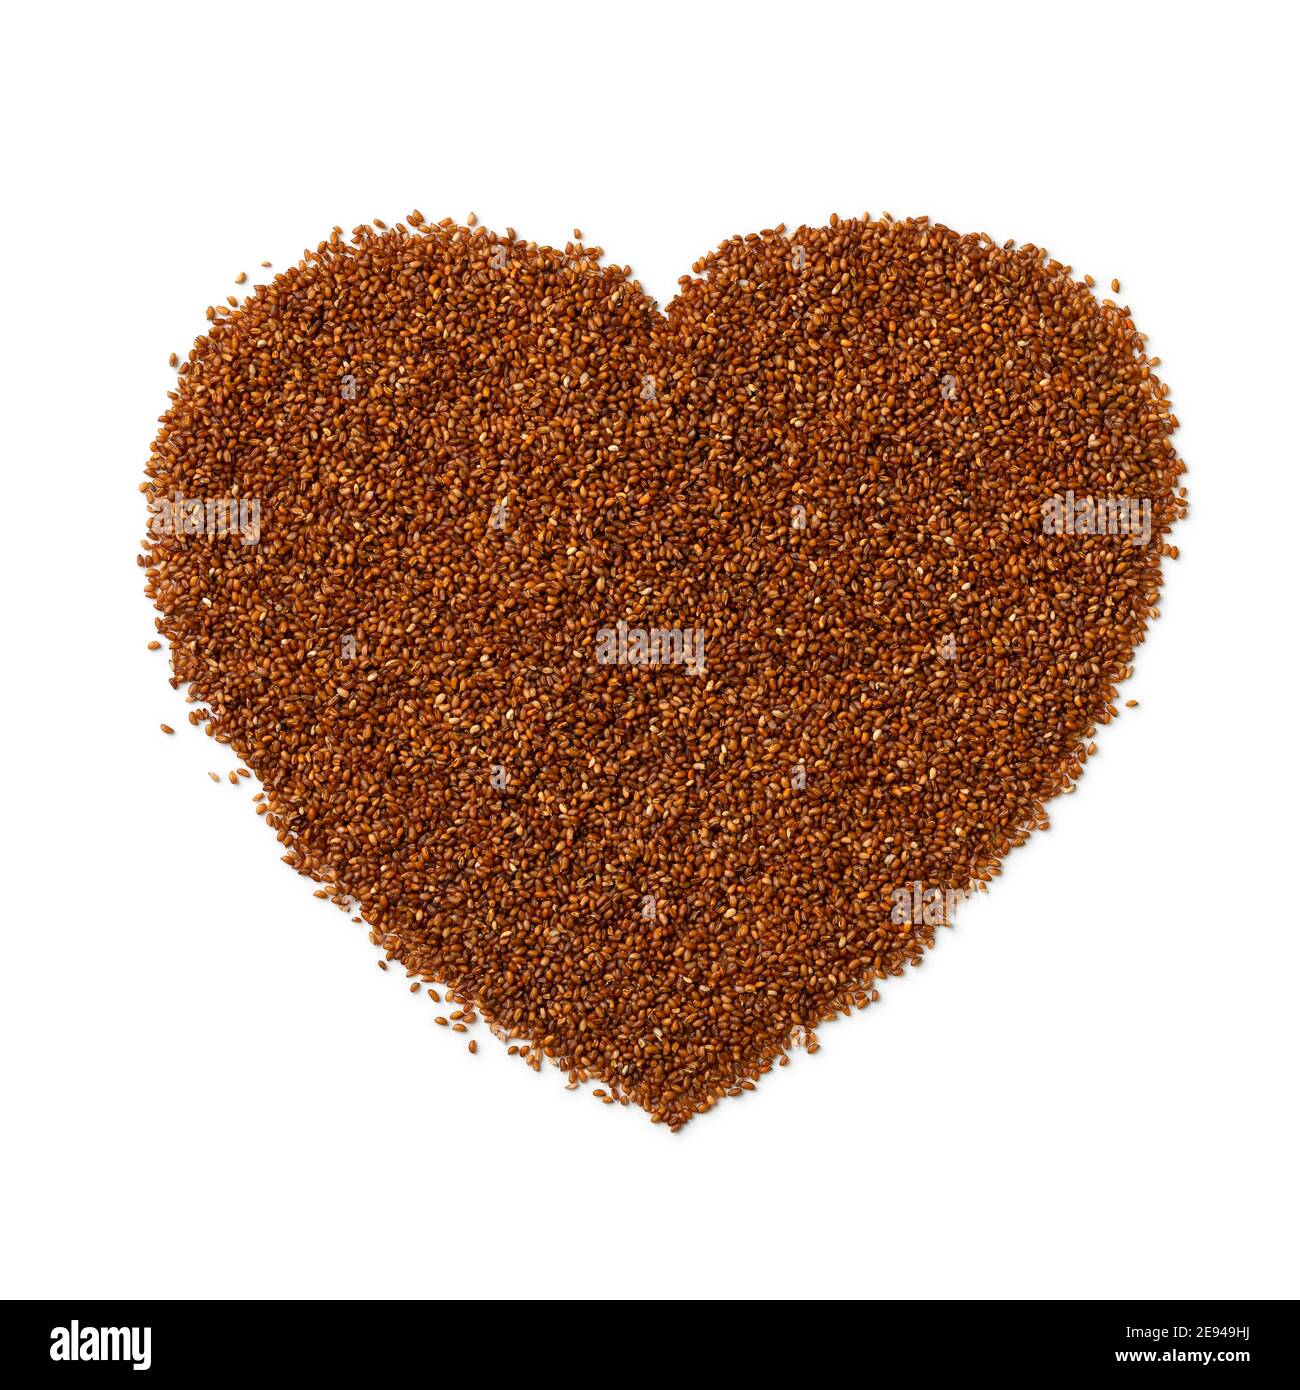 Raw teff seed in heart shape isolated on white background Stock Photo